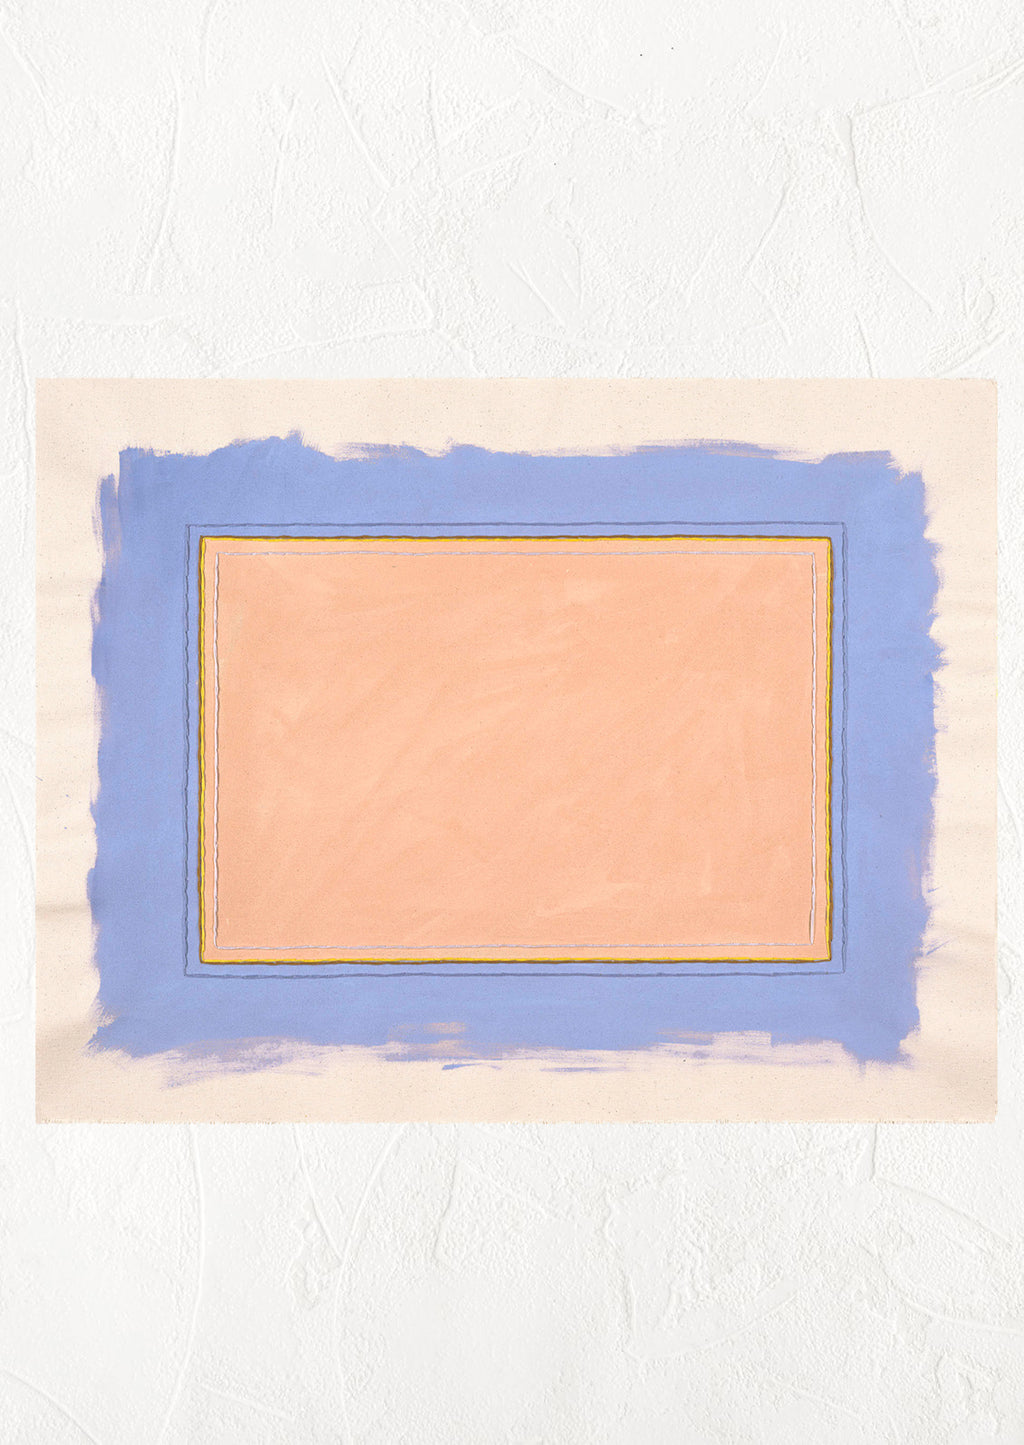 1: Digital reproduction of canvas painting featuring neon cornflower and peach painted rectangles with embroidery detail.